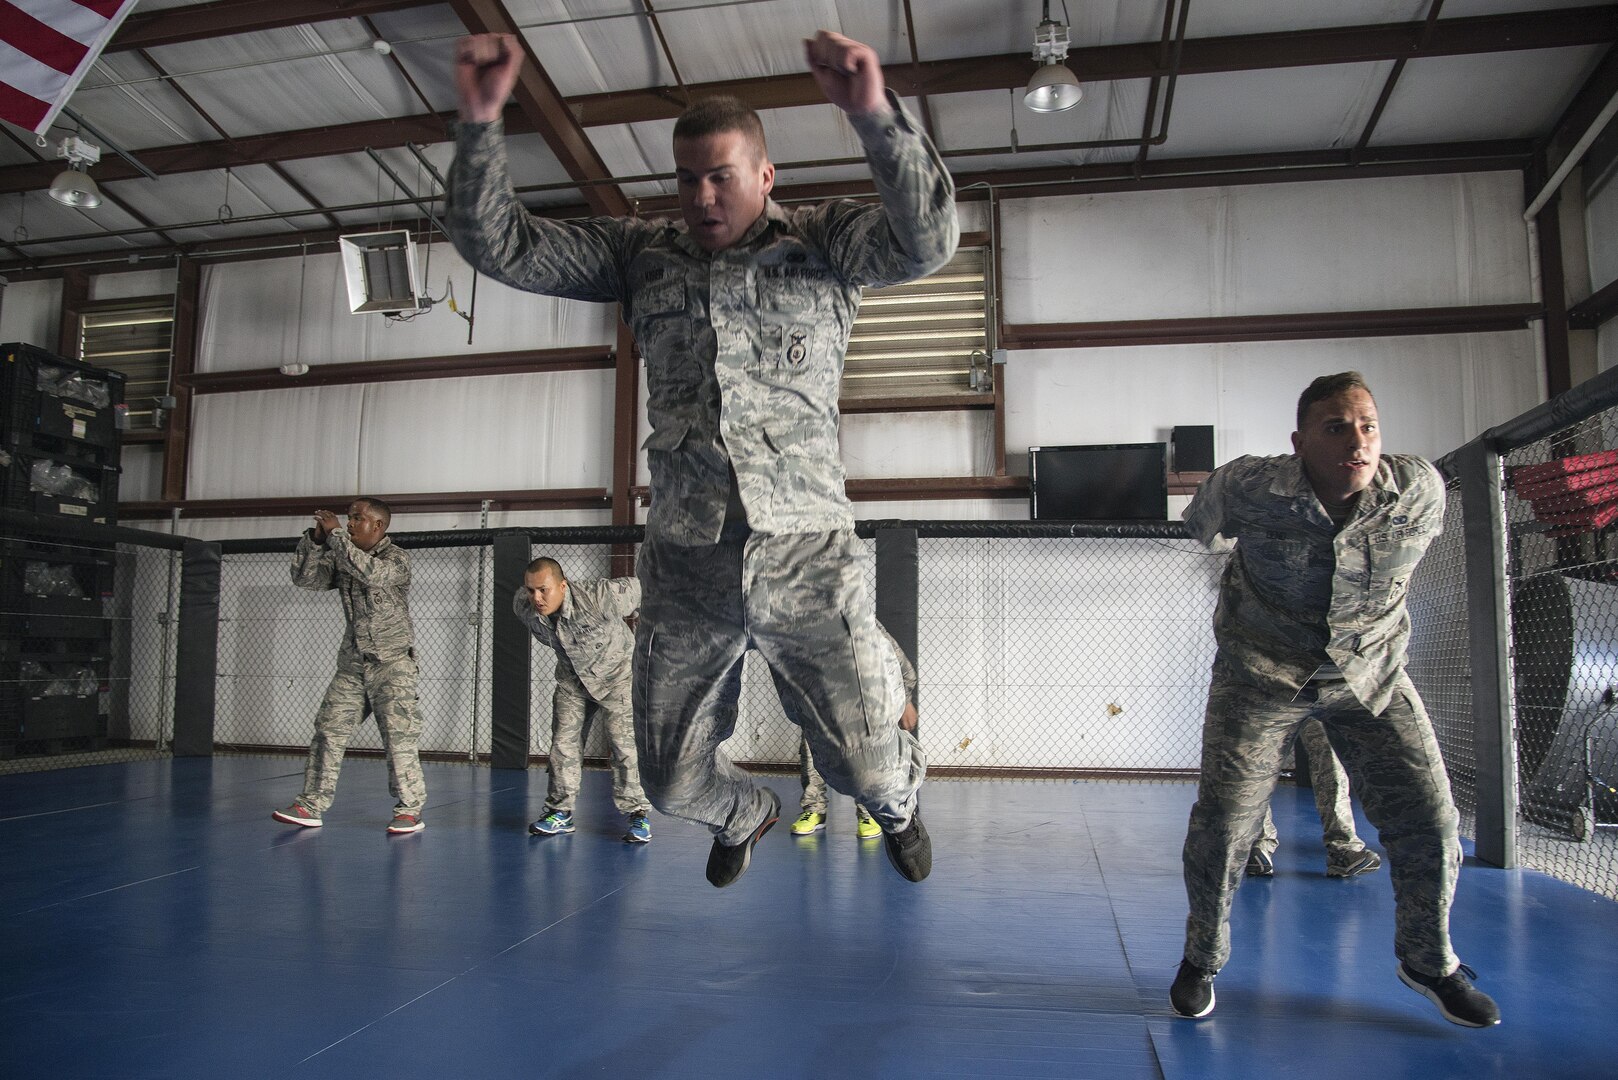 Staff Sgt. Neal Kiser and Senior Airman Andrew Deno, 902nd Security Forces Squadron, jump as a part of physical exercise during compatives training Sept. 14 at Joint Base San Antonio-Randolph. Kimura and Americana submission holds are often seen in mixed martial arts matches, but now they’re also commonplace in Hangar 52 at Joint Base San Antonio-Randolph.